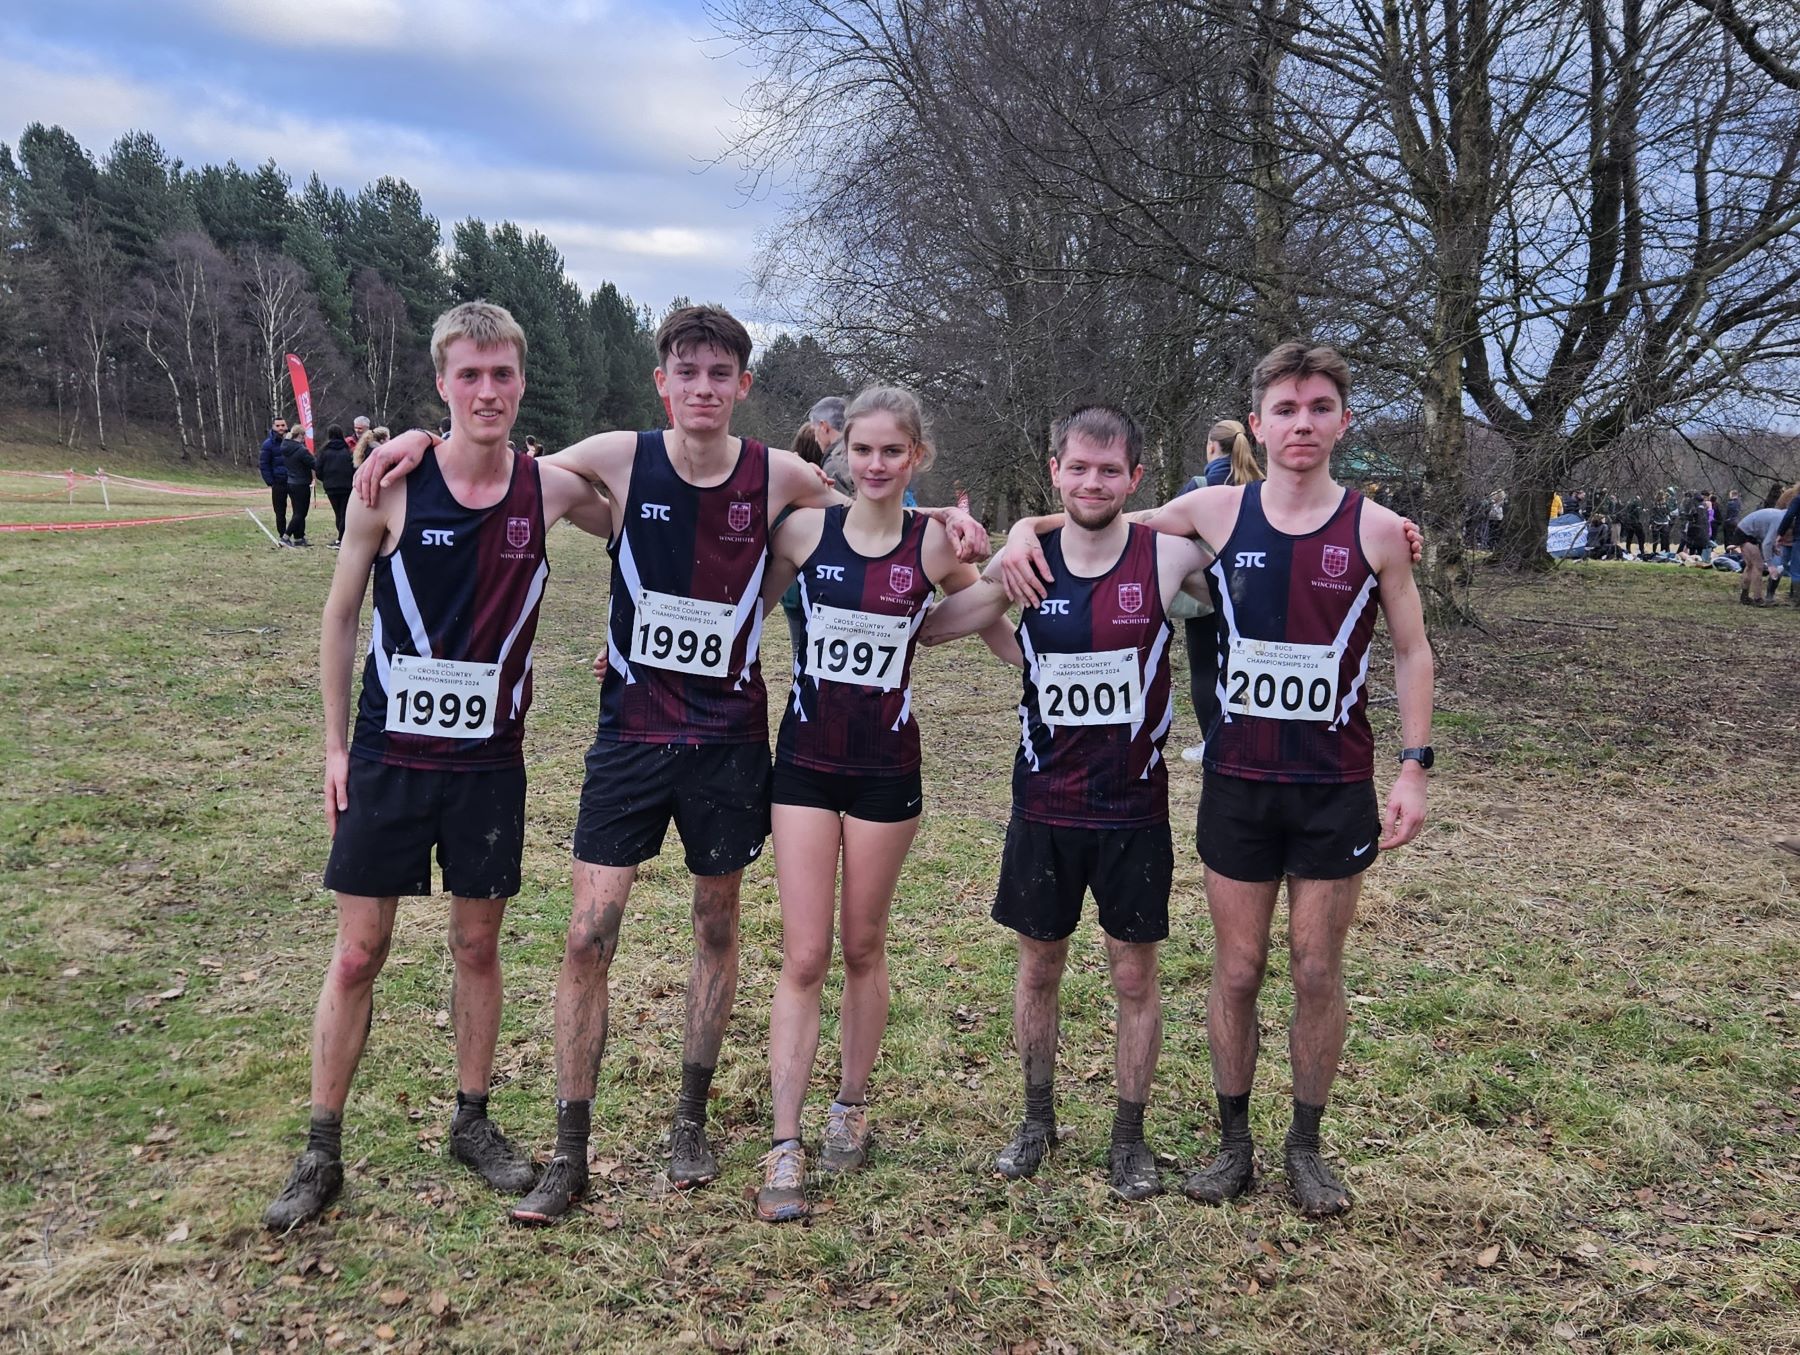 Five muddy cross country runners pose for photo after race